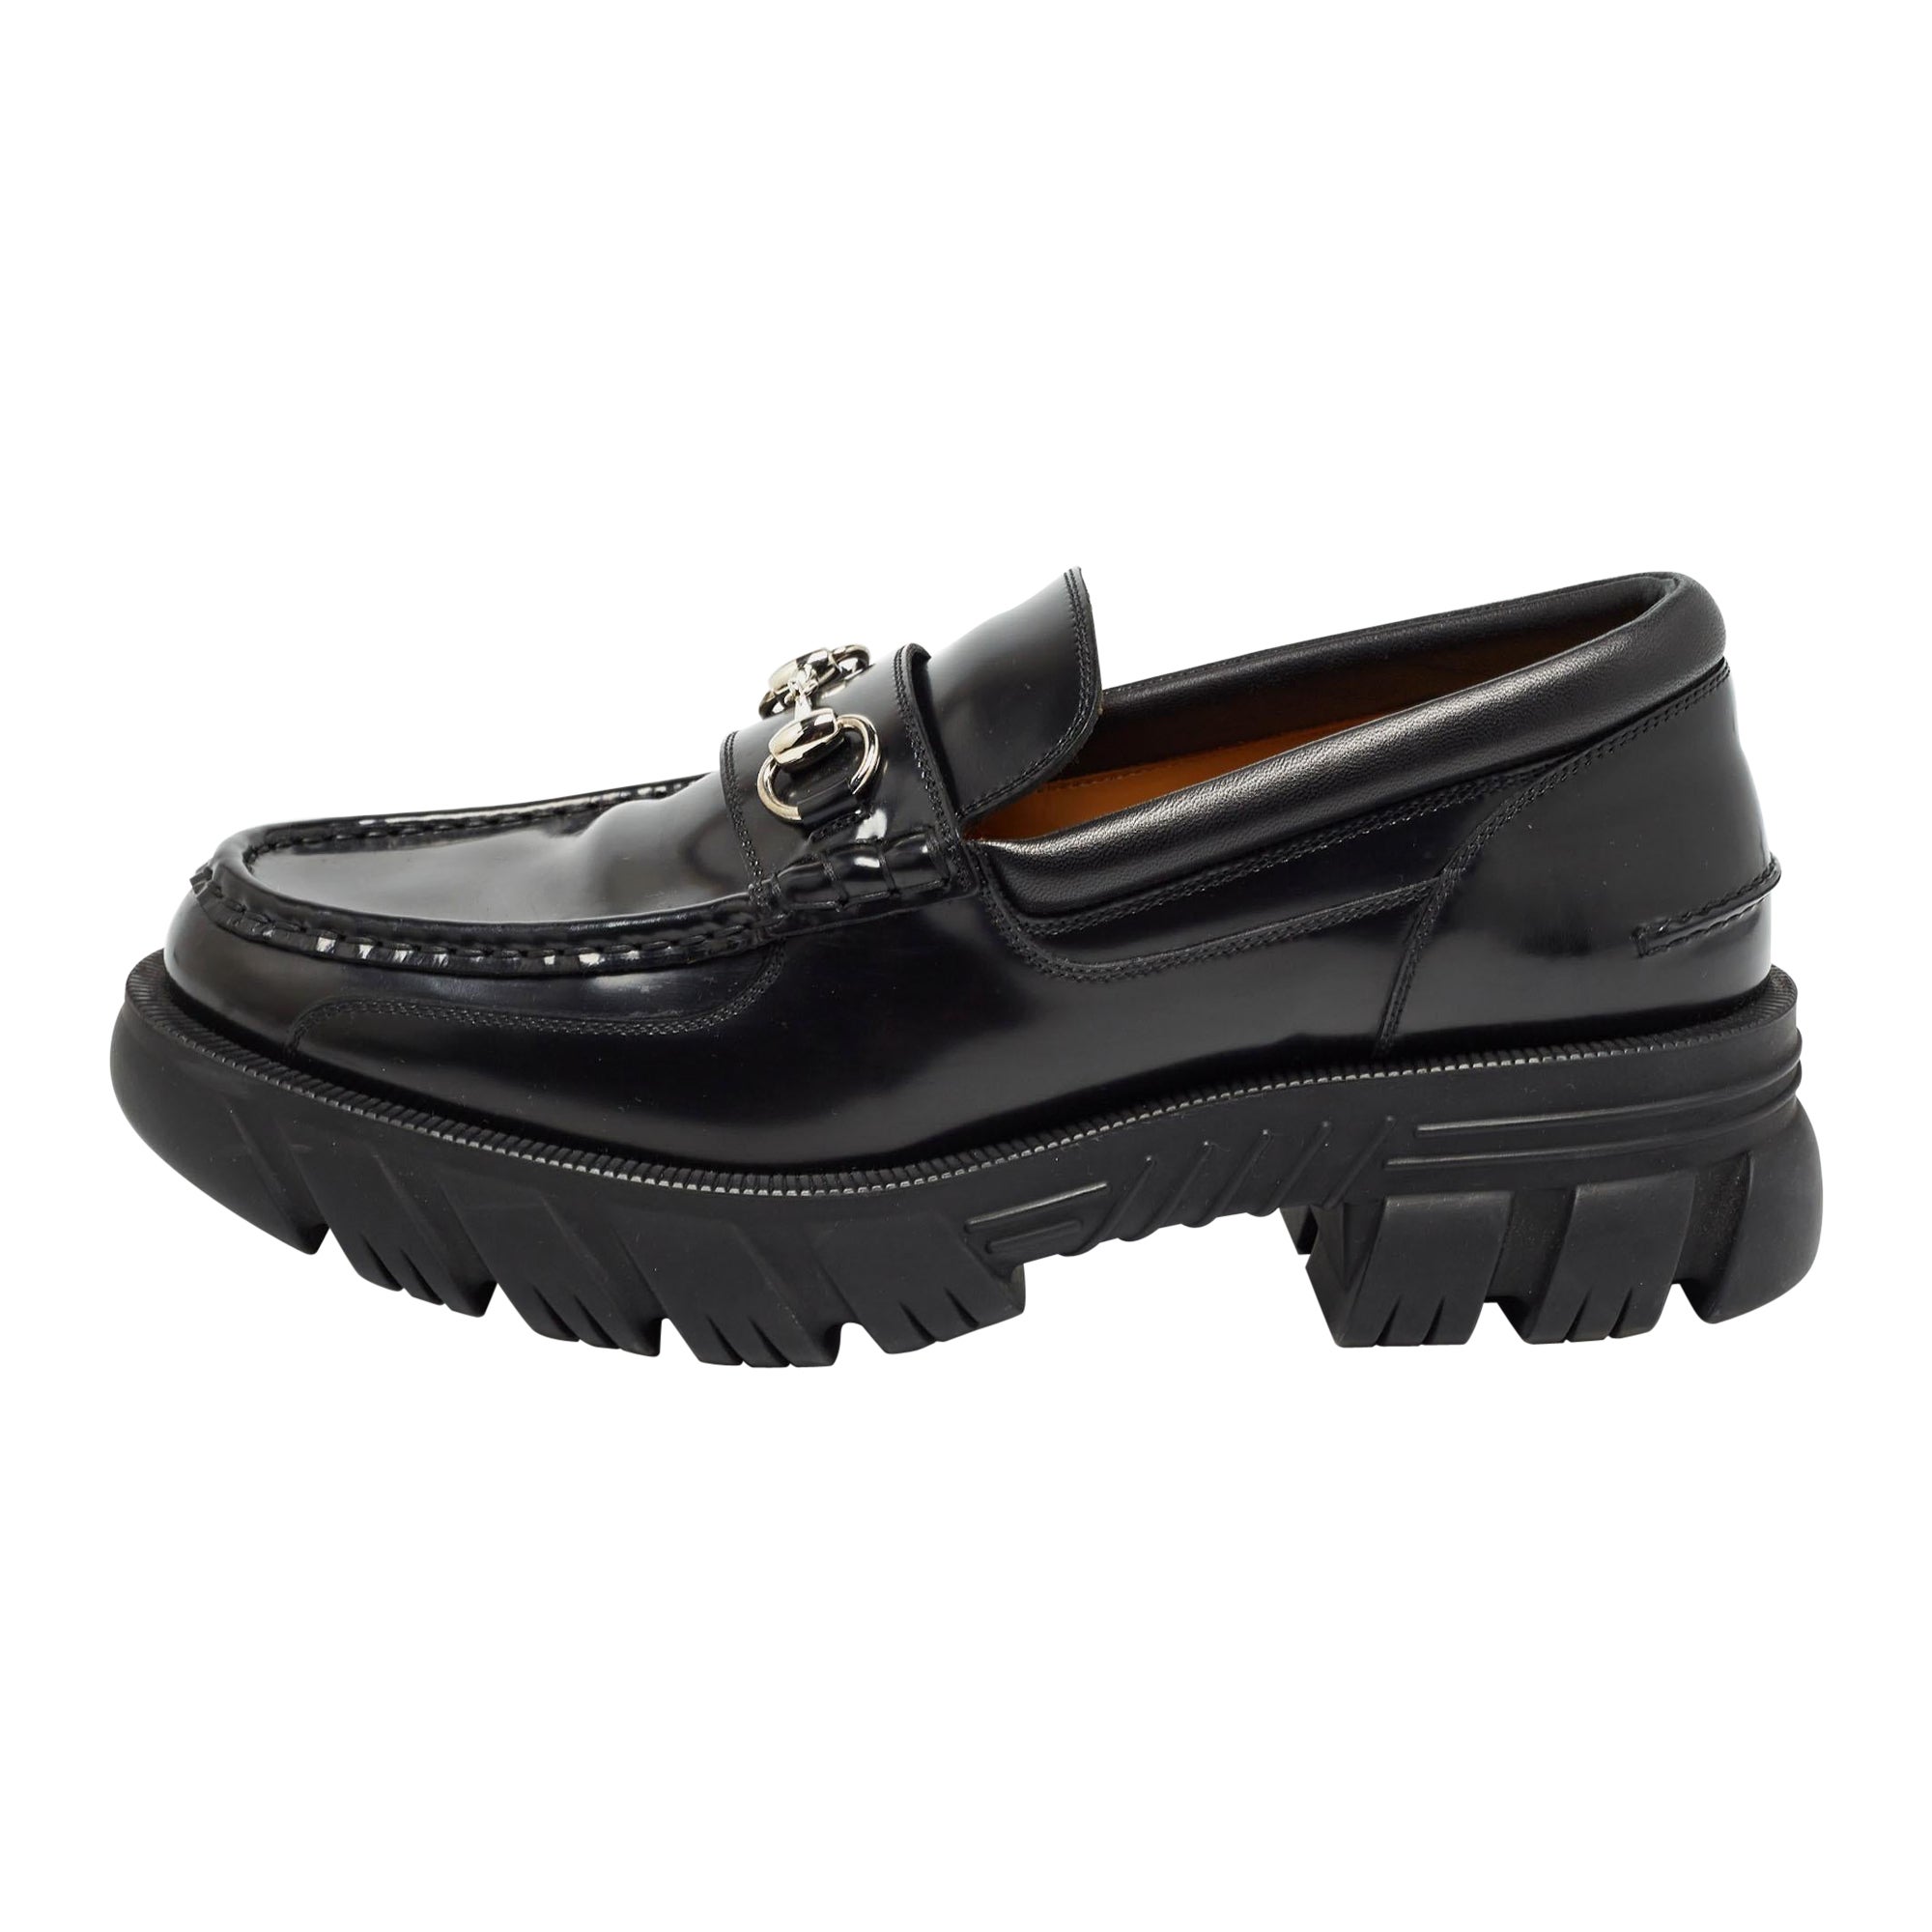 Gucci Black Leather Horsebit Slip On Loafers Size 44.5 For Sale